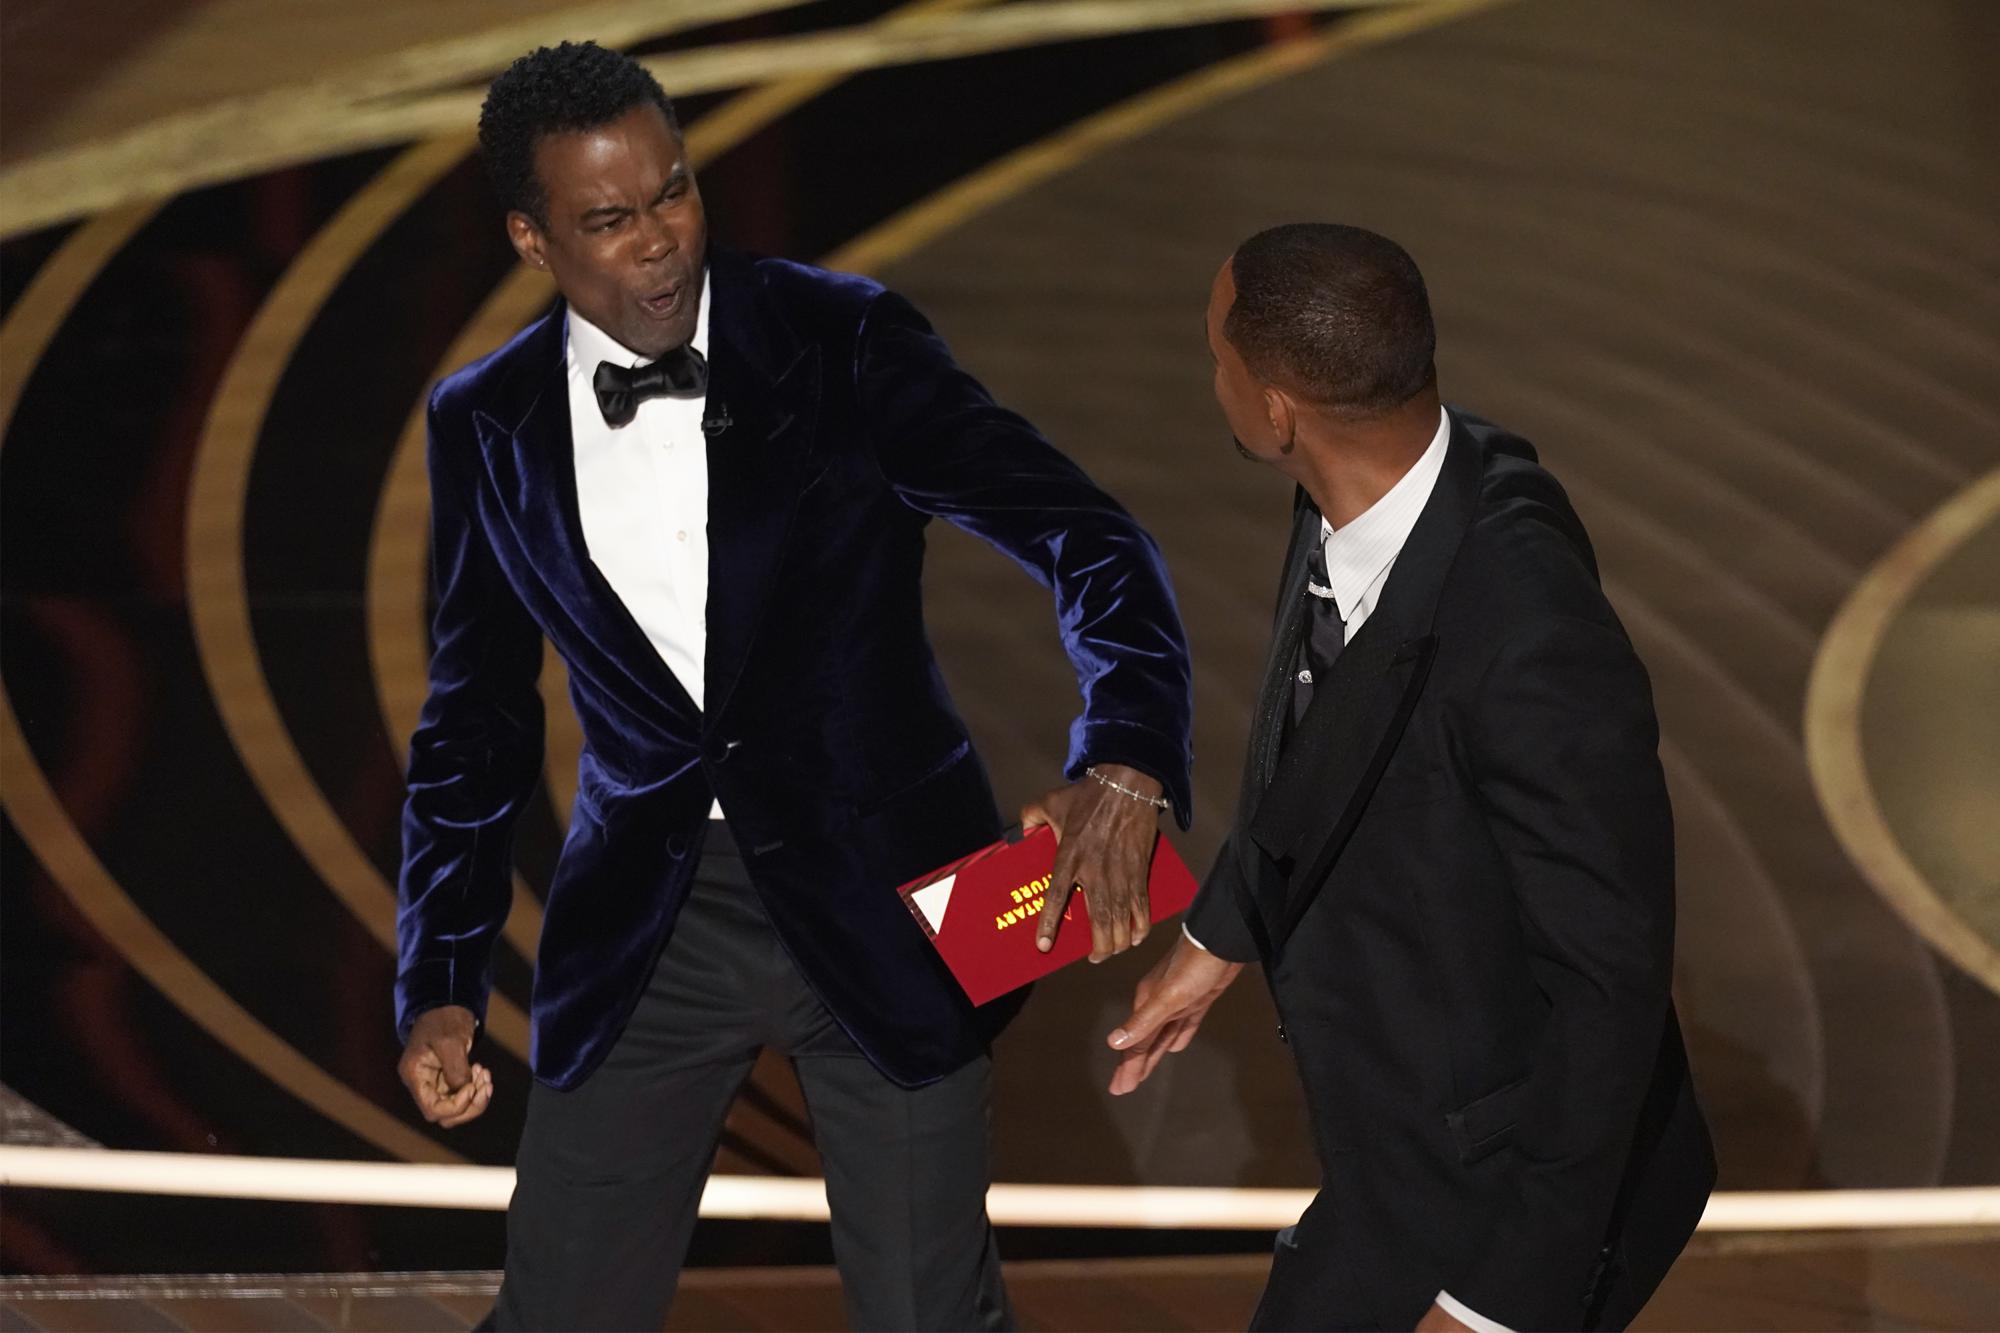 Presenter Chris Rock, left, reacts after being hit on stage by Will Smith while presenting the award for best documentary feature at the Oscars on Sunday, March 27, 2022, at the Dolby Theatre in Los Angeles. 